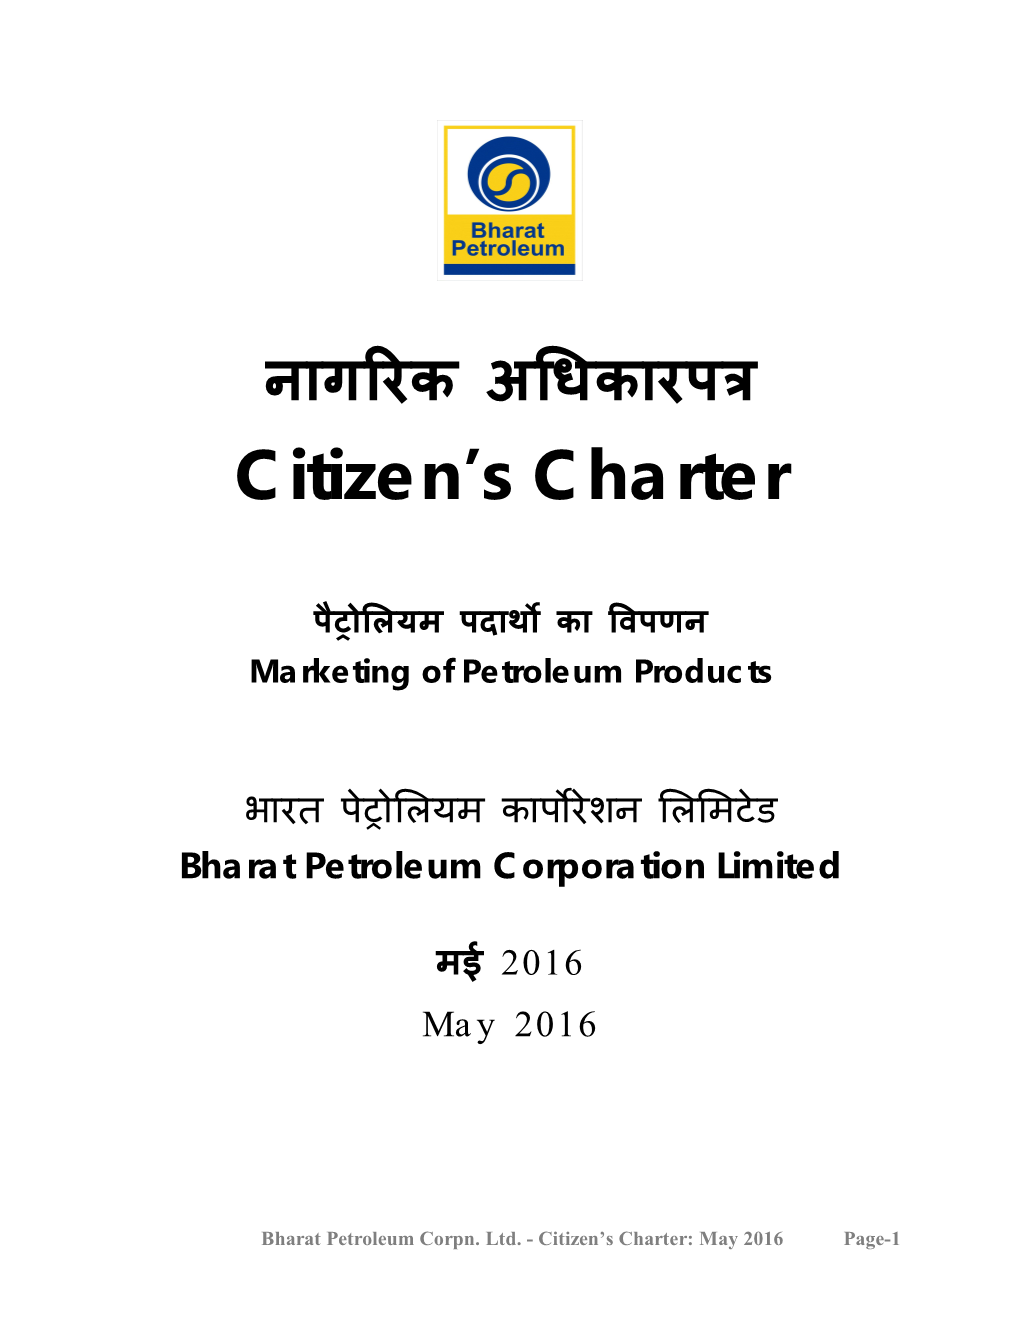 Citizen's Charter Is to Improve the Quality of Public Services